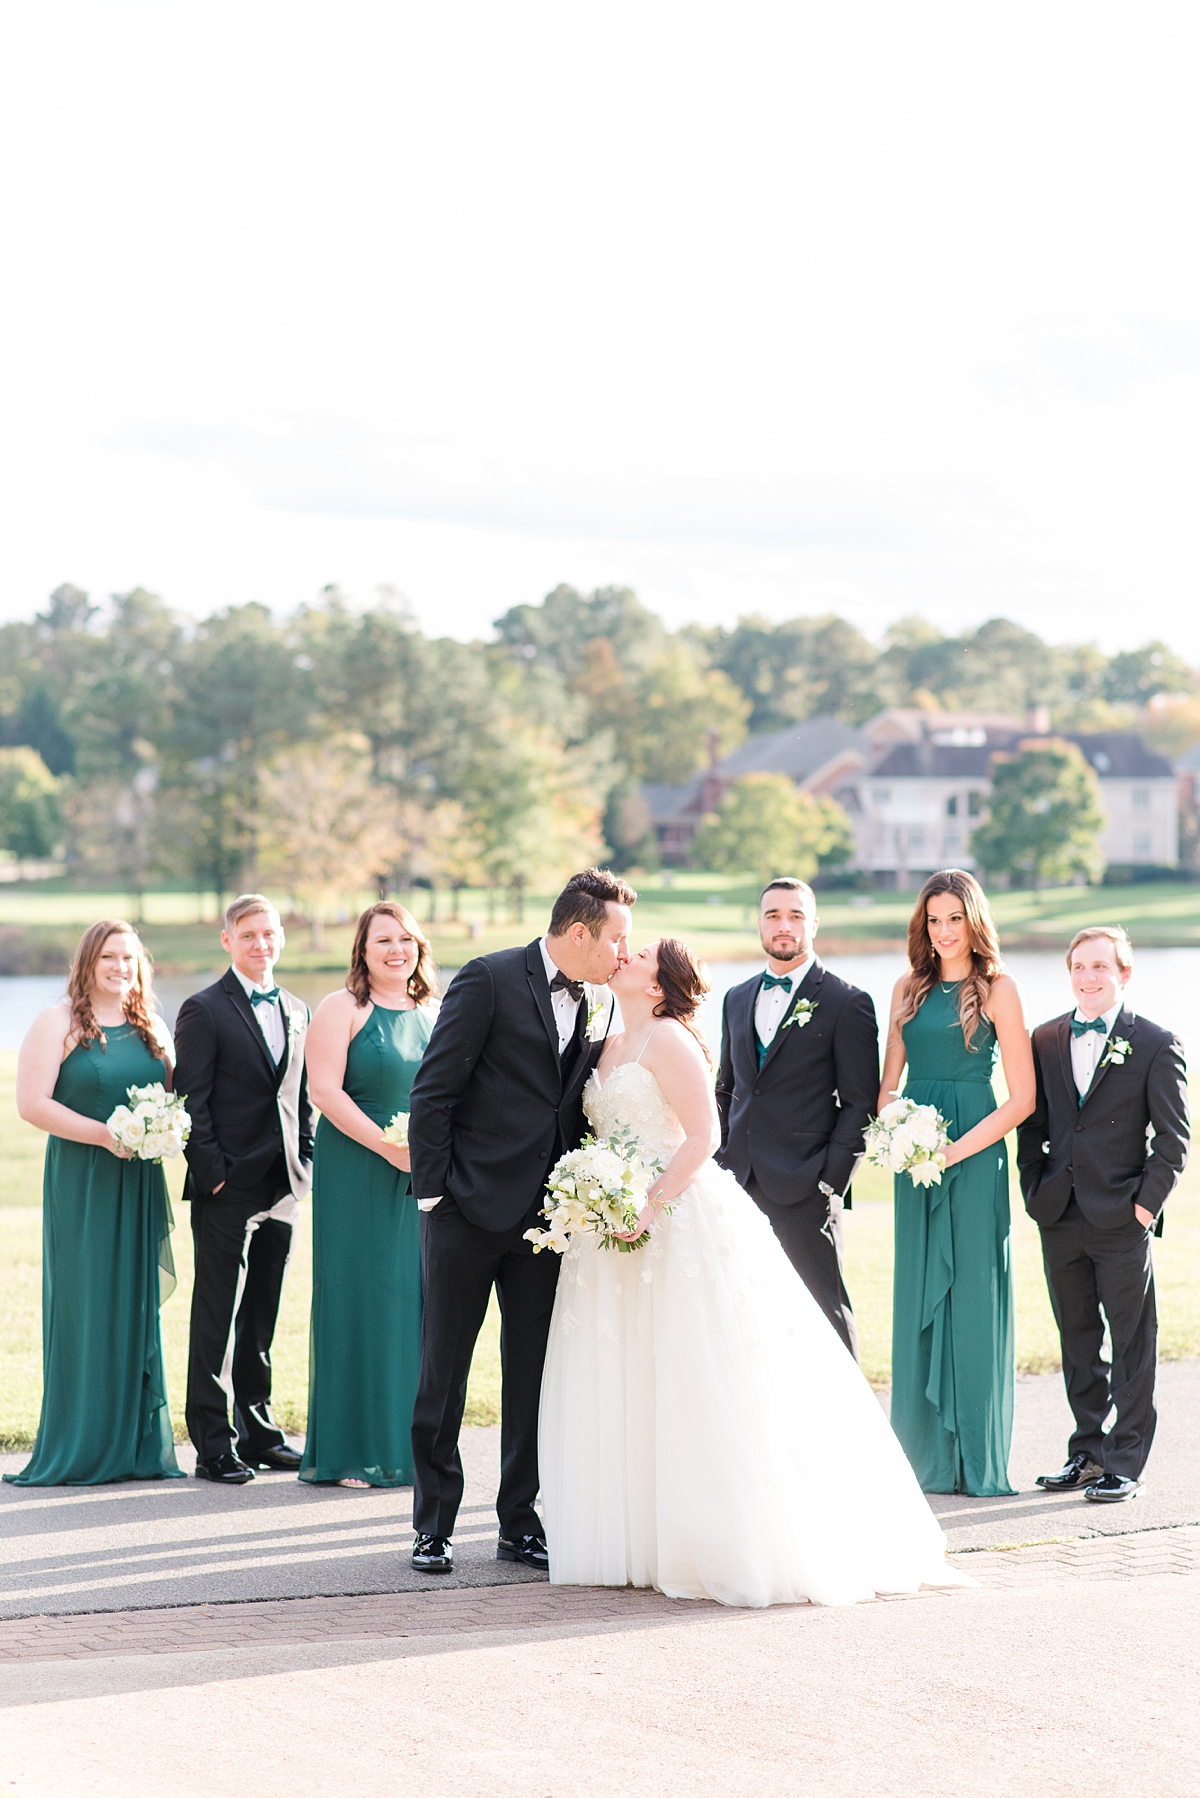 Bridal Party Portraits with Green Bridesmaid Dresses at Dominion Club Wedding. Wedding Photography by Richmond Wedding Photographer Kailey Brianne Photography.